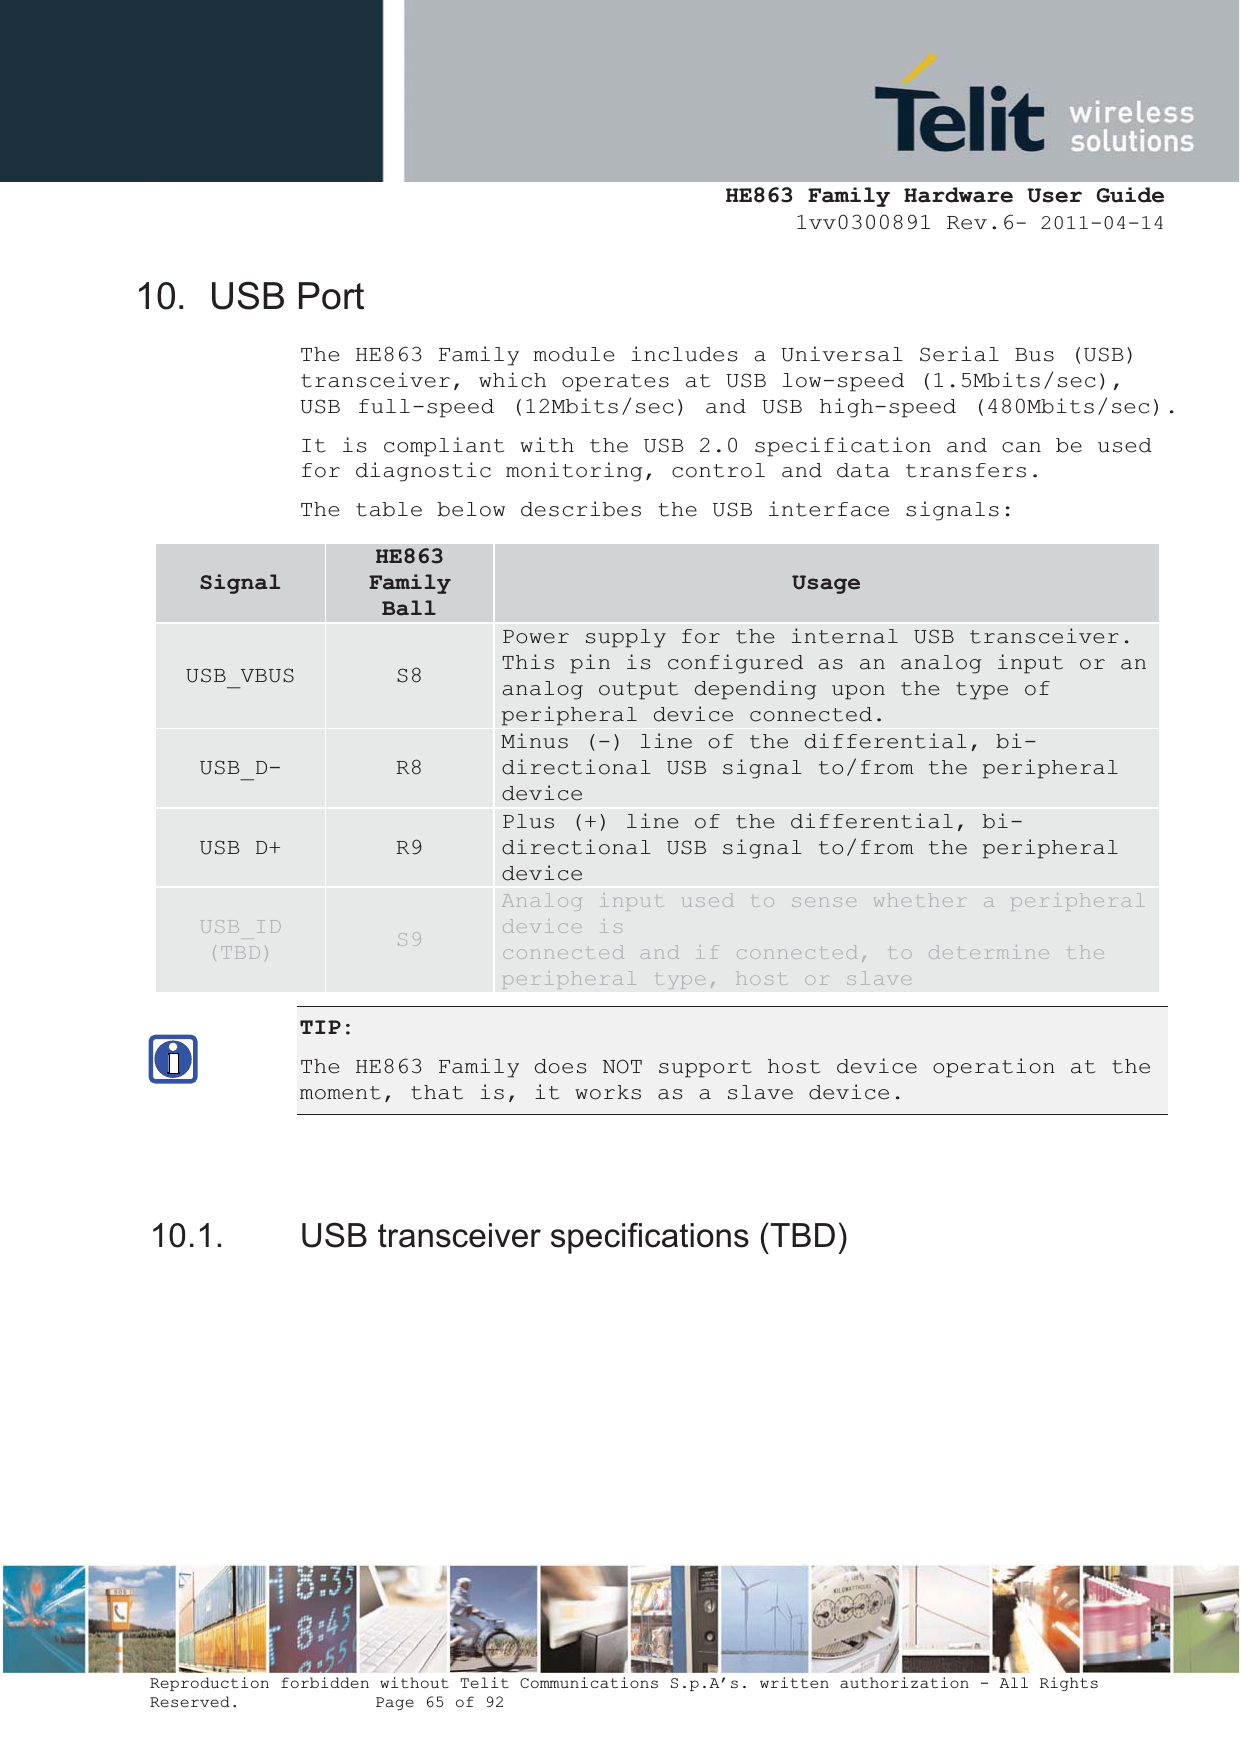  HE863 Family Hardware User Guide 1vv0300891 Rev.6- 2011-04-14    Reproduction forbidden without Telit Communications S.p.A’s. written authorization - All Rights Reserved.    Page 65 of 92  10. USB Port The HE863 Family module includes a Universal Serial Bus (USB) transceiver, which operates at USB low-speed (1.5Mbits/sec), USB full-speed (12Mbits/sec) and USB high-speed (480Mbits/sec). It is compliant with the USB 2.0 specification and can be used for diagnostic monitoring, control and data transfers. The table below describes the USB interface signals: TIP:  The HE863 Family does NOT support host device operation at the moment, that is, it works as a slave device.   10.1.  USB transceiver specifications (TBD) SignalHE863FamilyBallUsageUSB_VBUS  S8 Power supply for the internal USB transceiver. This pin is configured as an analog input or an analog output depending upon the type of peripheral device connected. USB_D-  R8 Minus (-) line of the differential, bi-directional USB signal to/from the peripheral device USB D+  R9 Plus (+) line of the differential, bi-directional USB signal to/from the peripheral device USB_ID (TBD)  S9 Analog input used to sense whether a peripheral device is connected and if connected, to determine the peripheral type, host or slave 